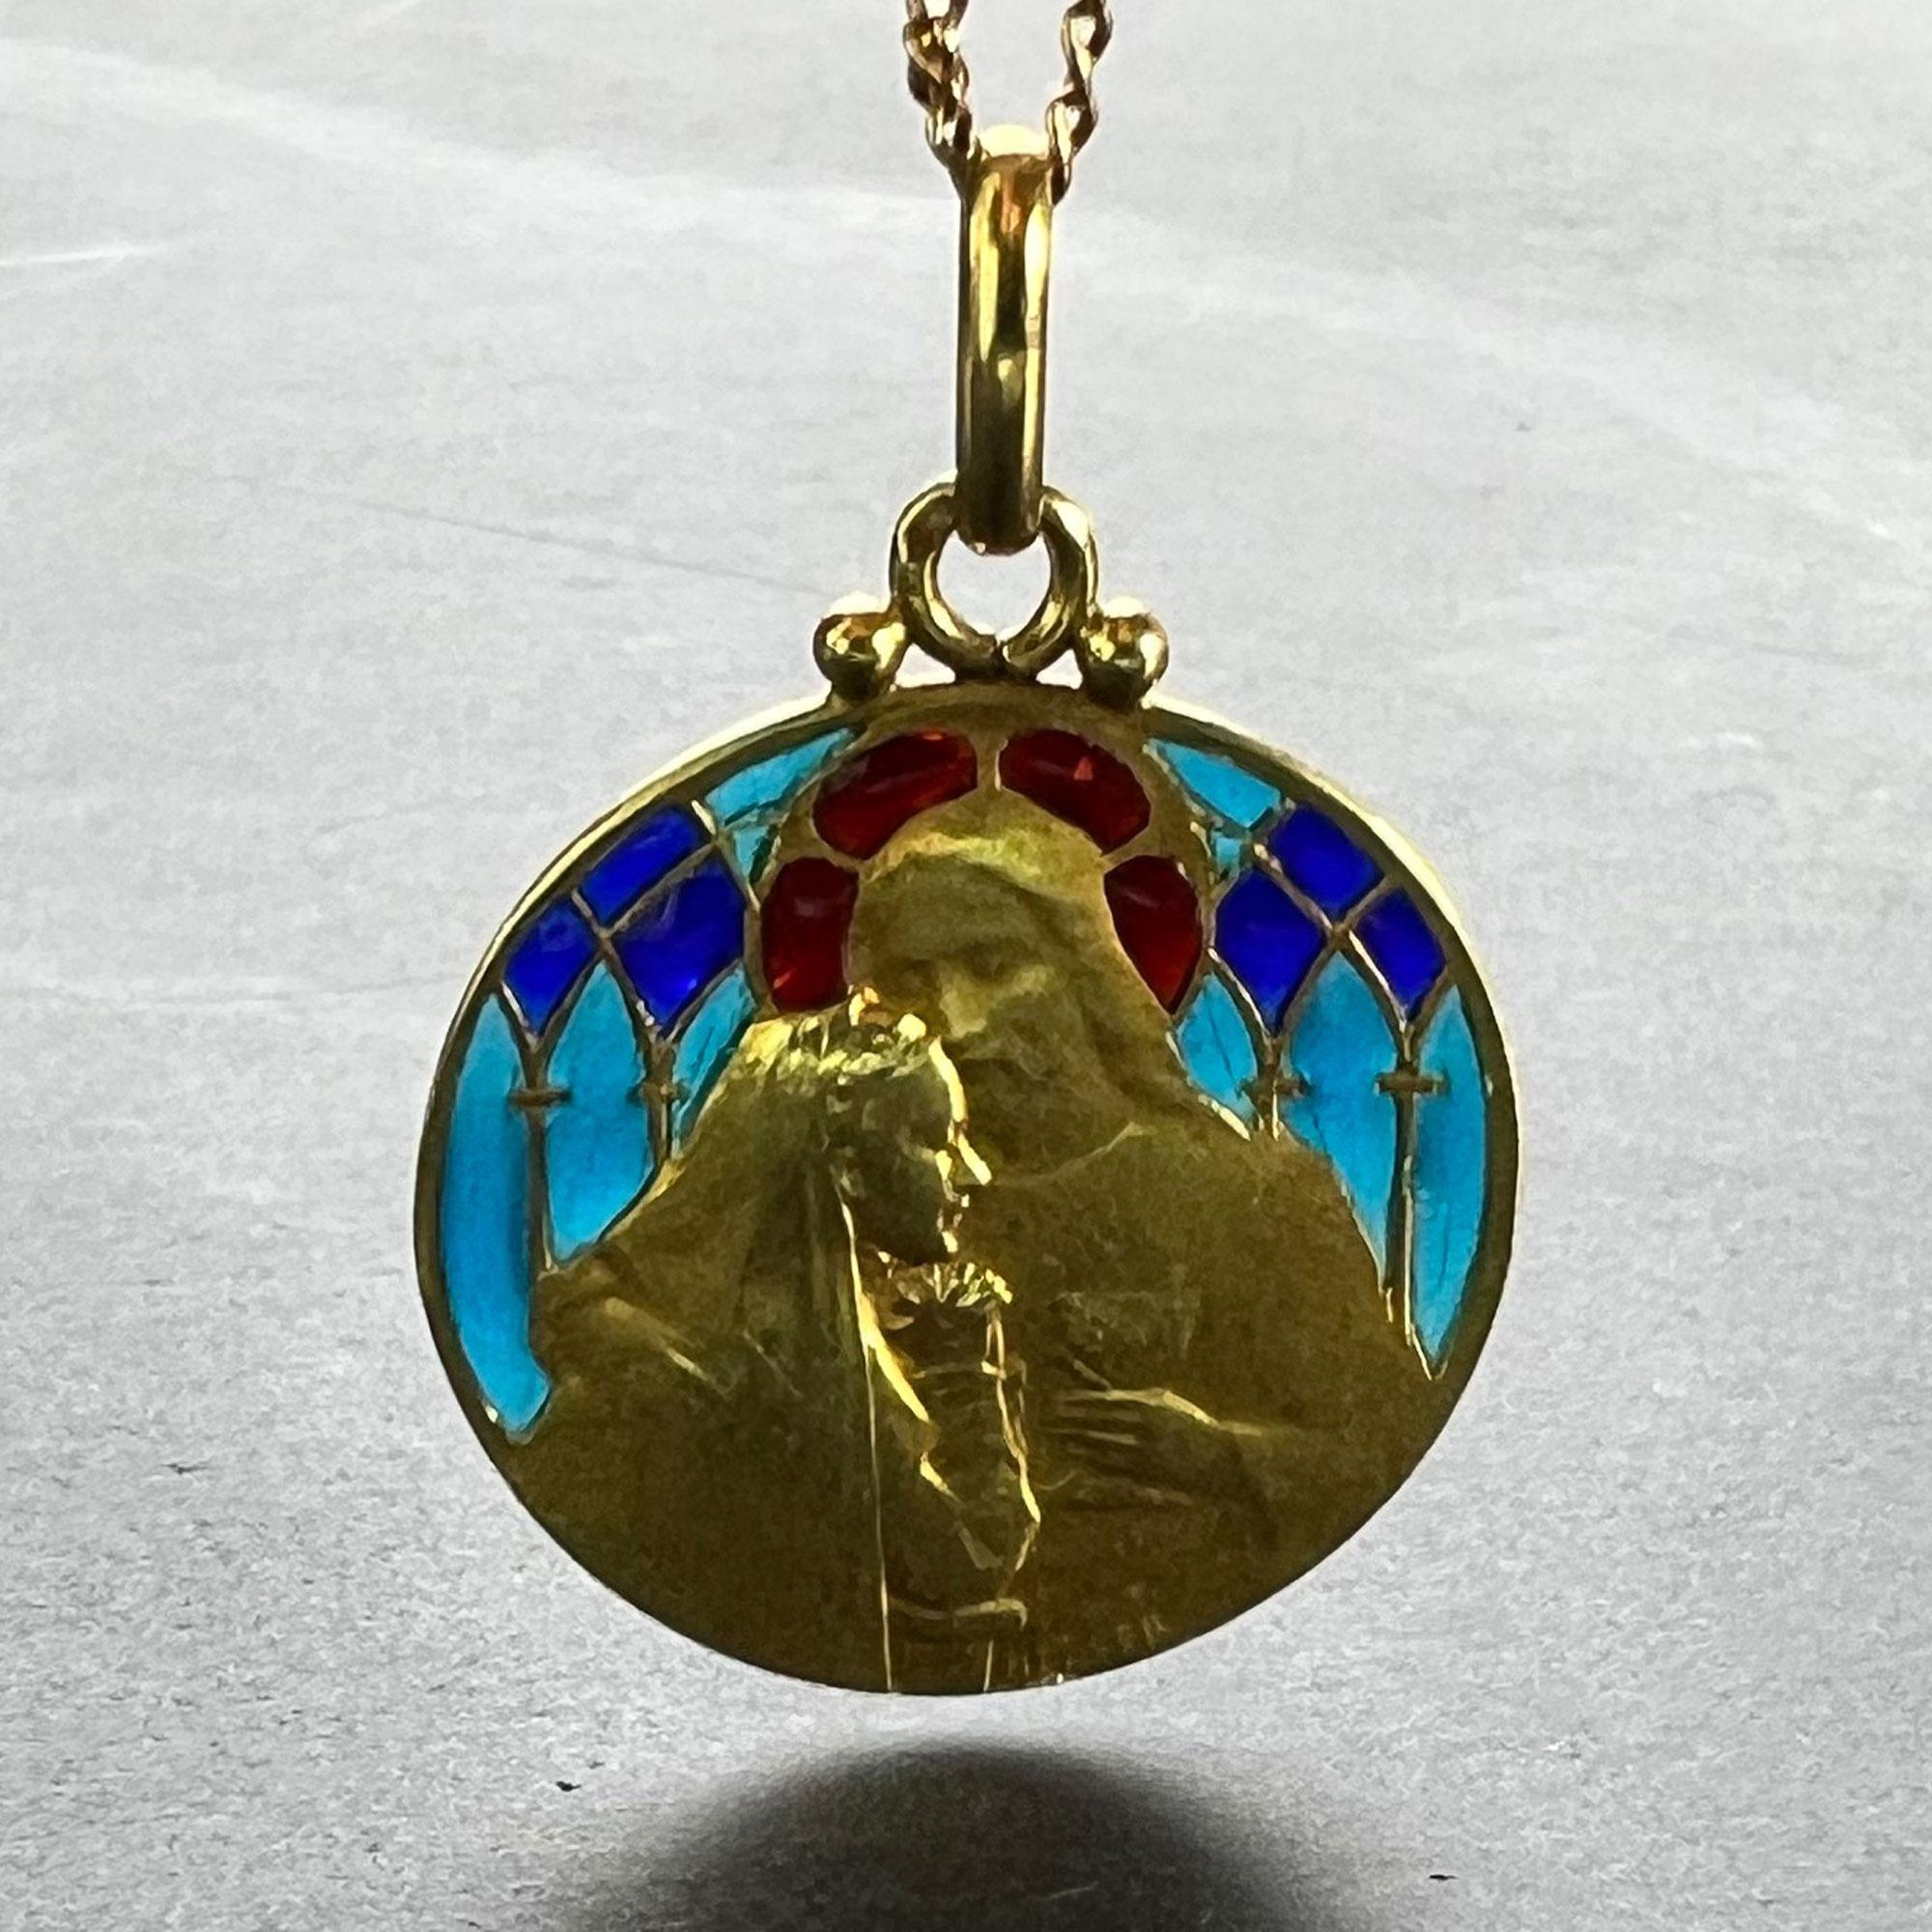 A French 18 karat (18K) yellow gold pendant designed as a round medal depicting the moment of Holy Communion, with Jesus Christ holding the goblet in one hand, and resting His other hand on the shoulder of the veiled recipient. Set with red, blue